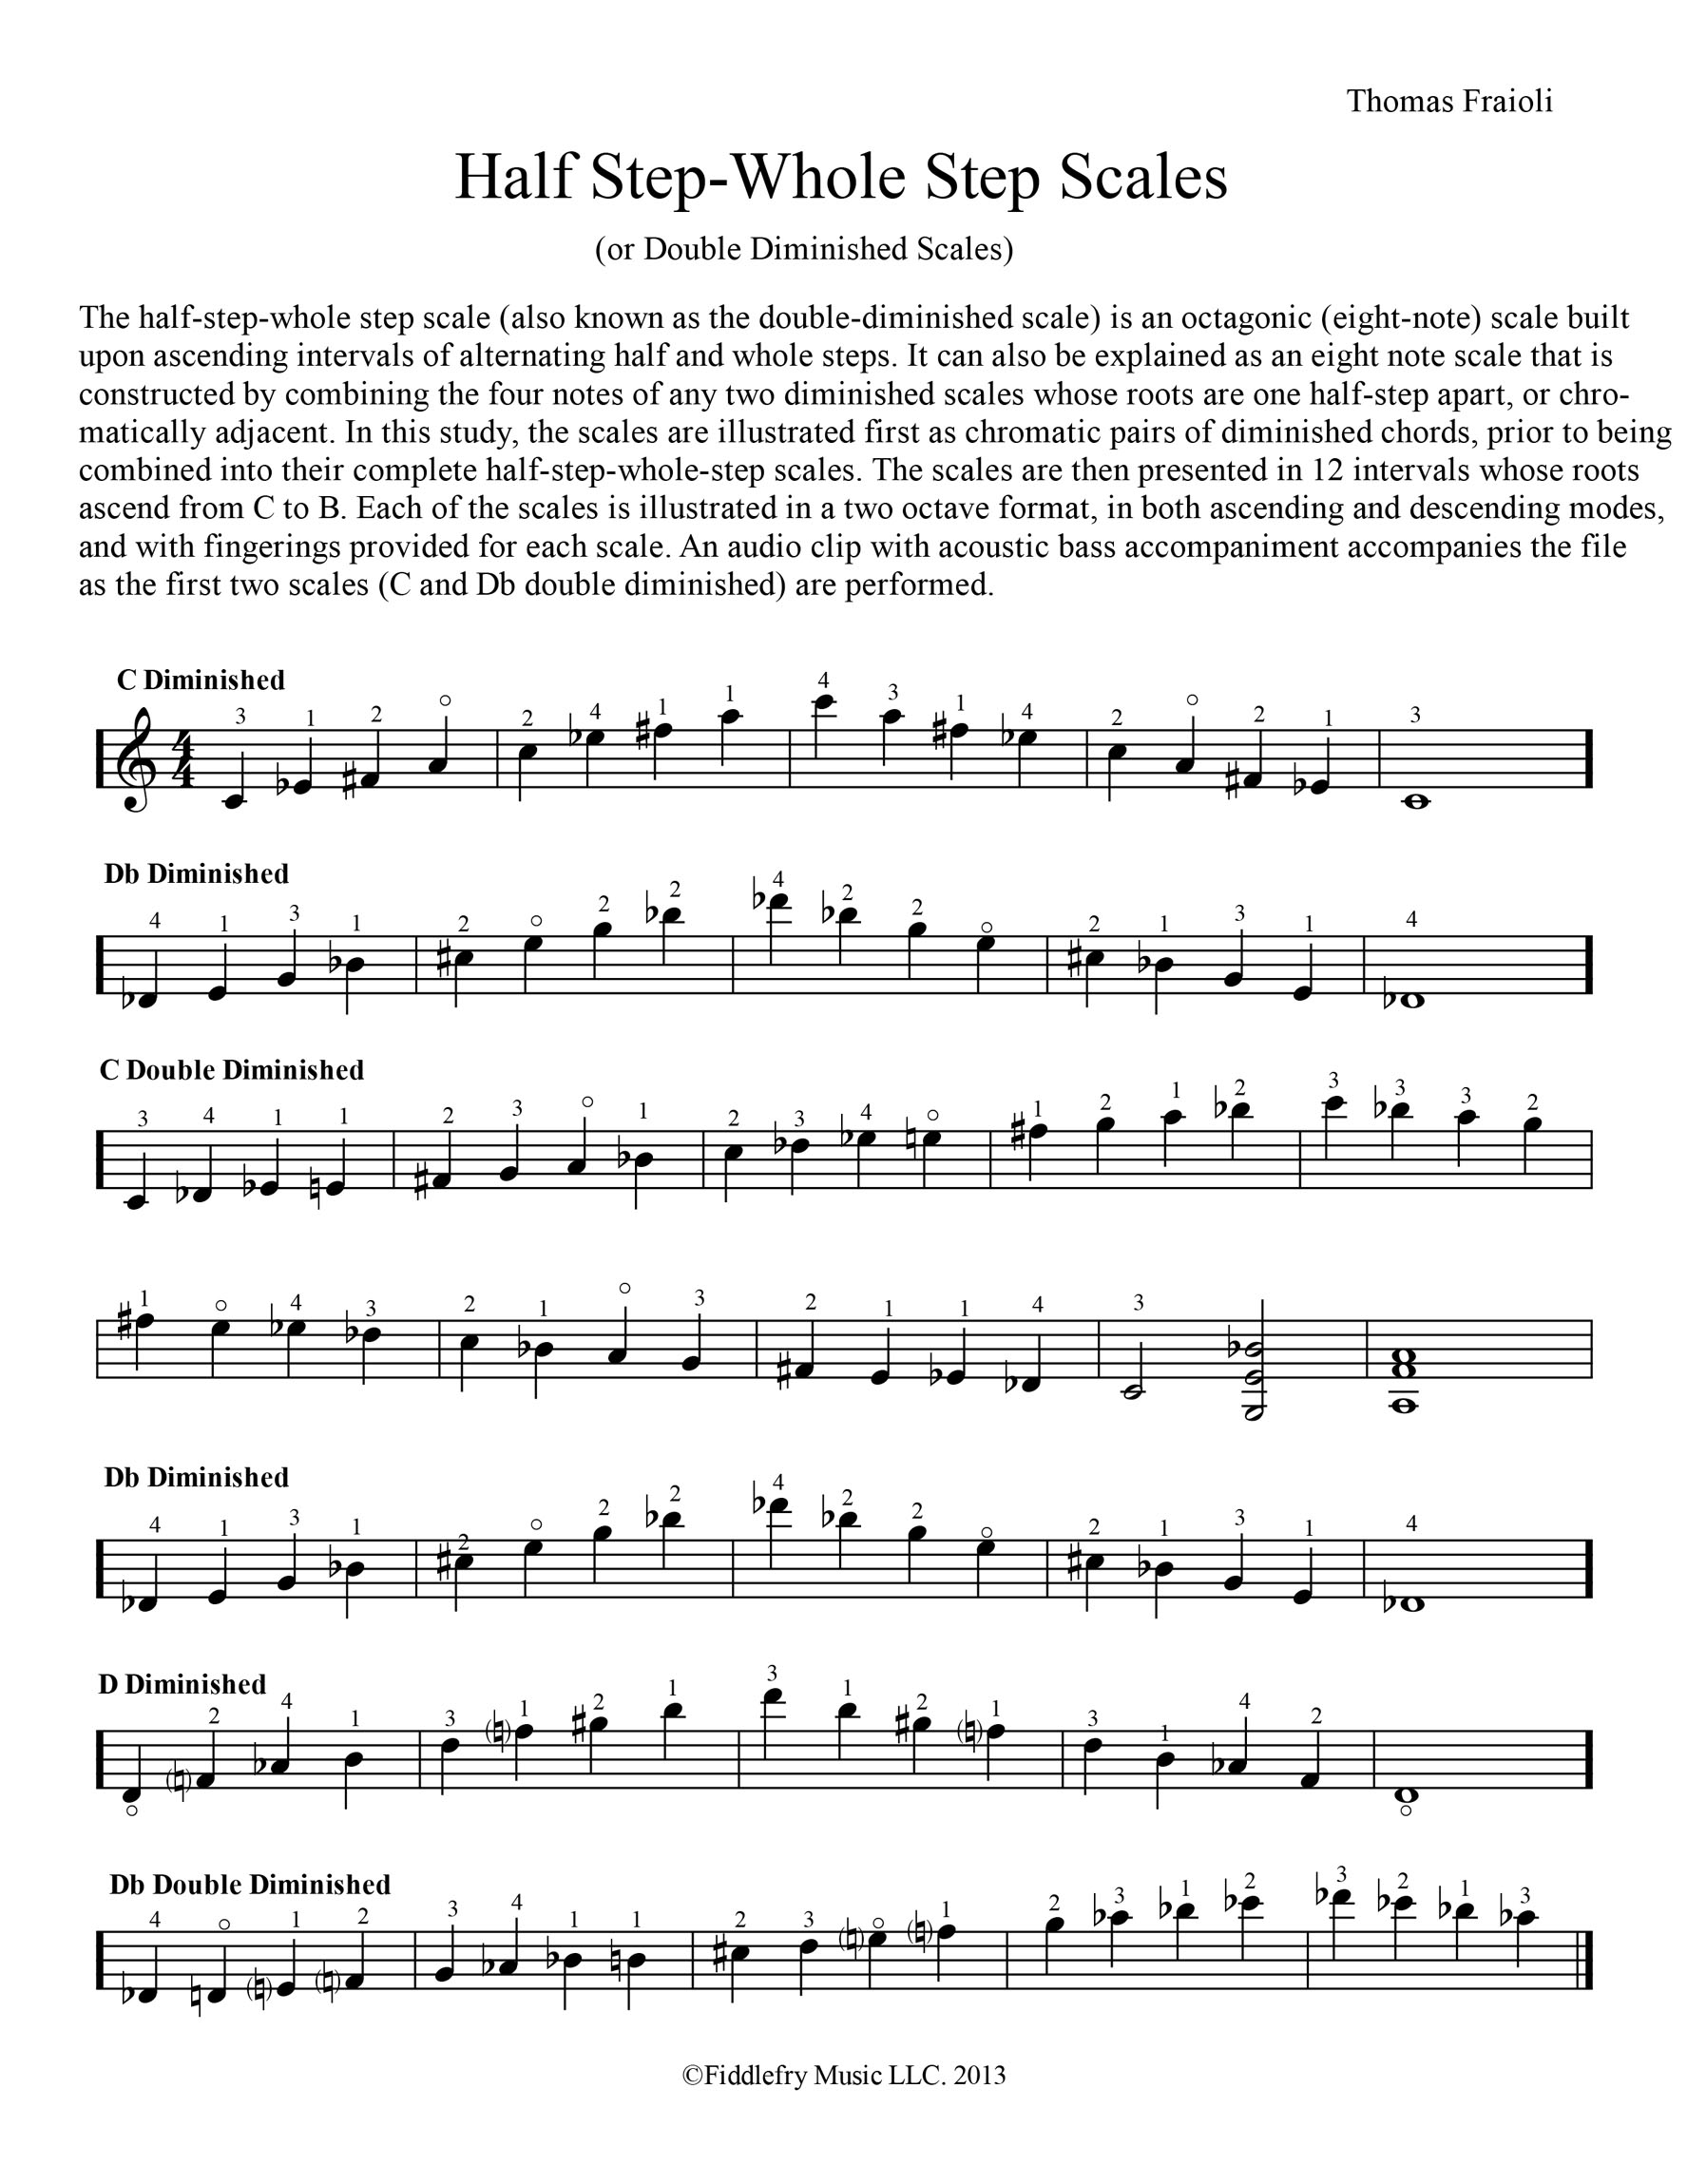 Jazz and Blues Violinist's Scale Book — Fiddlefry